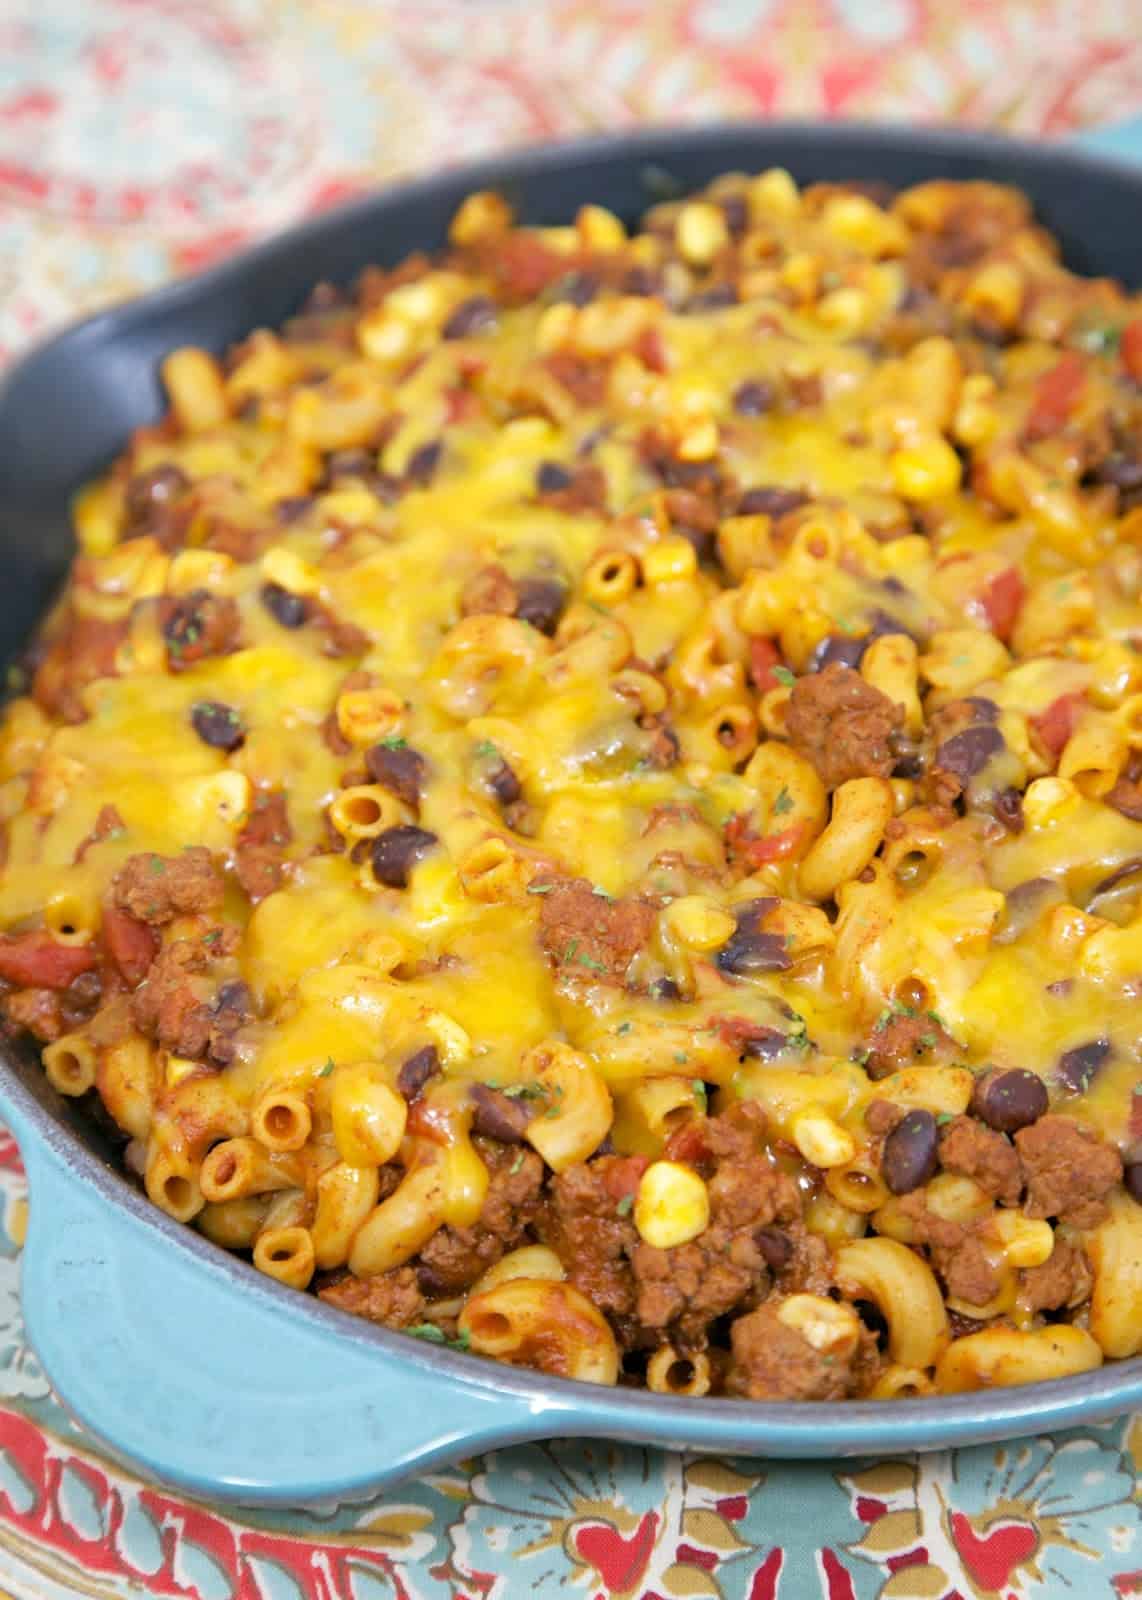 One Pot Tex-Mex Goulash - beef, taco seasoning, corn, black beans, tomatoes and pasta - delicious! Great weeknight meal that is ready to eat in 20 minutes! The whole family loves this easy one-pot Mexican recipe!